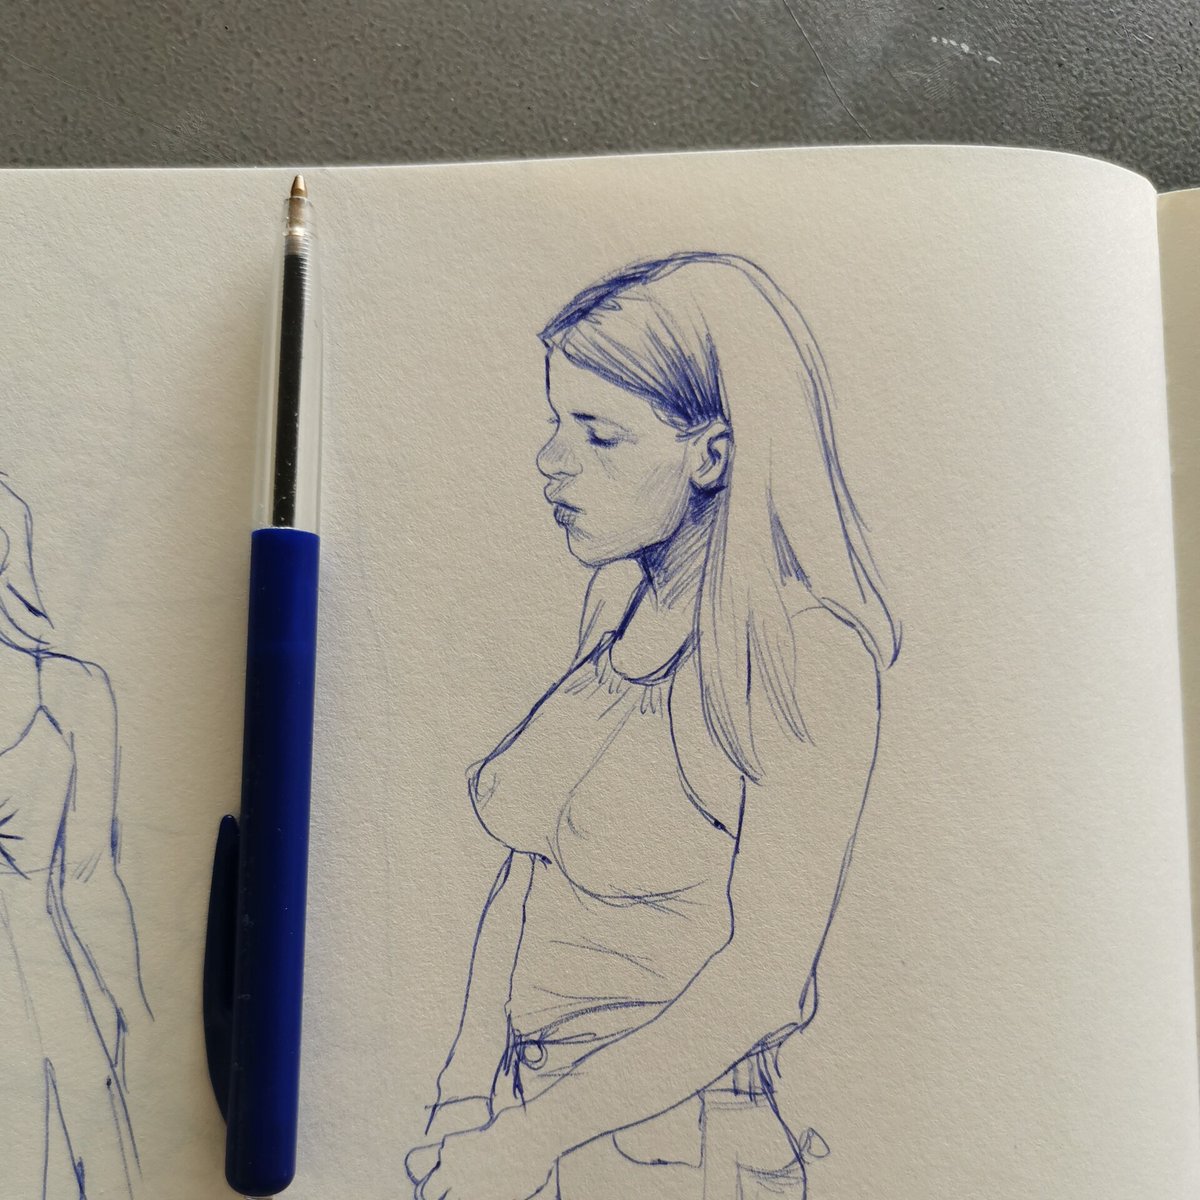 Good sketching habit is the way to get better! I used to take the bus to school to have an extra hour of sketching 